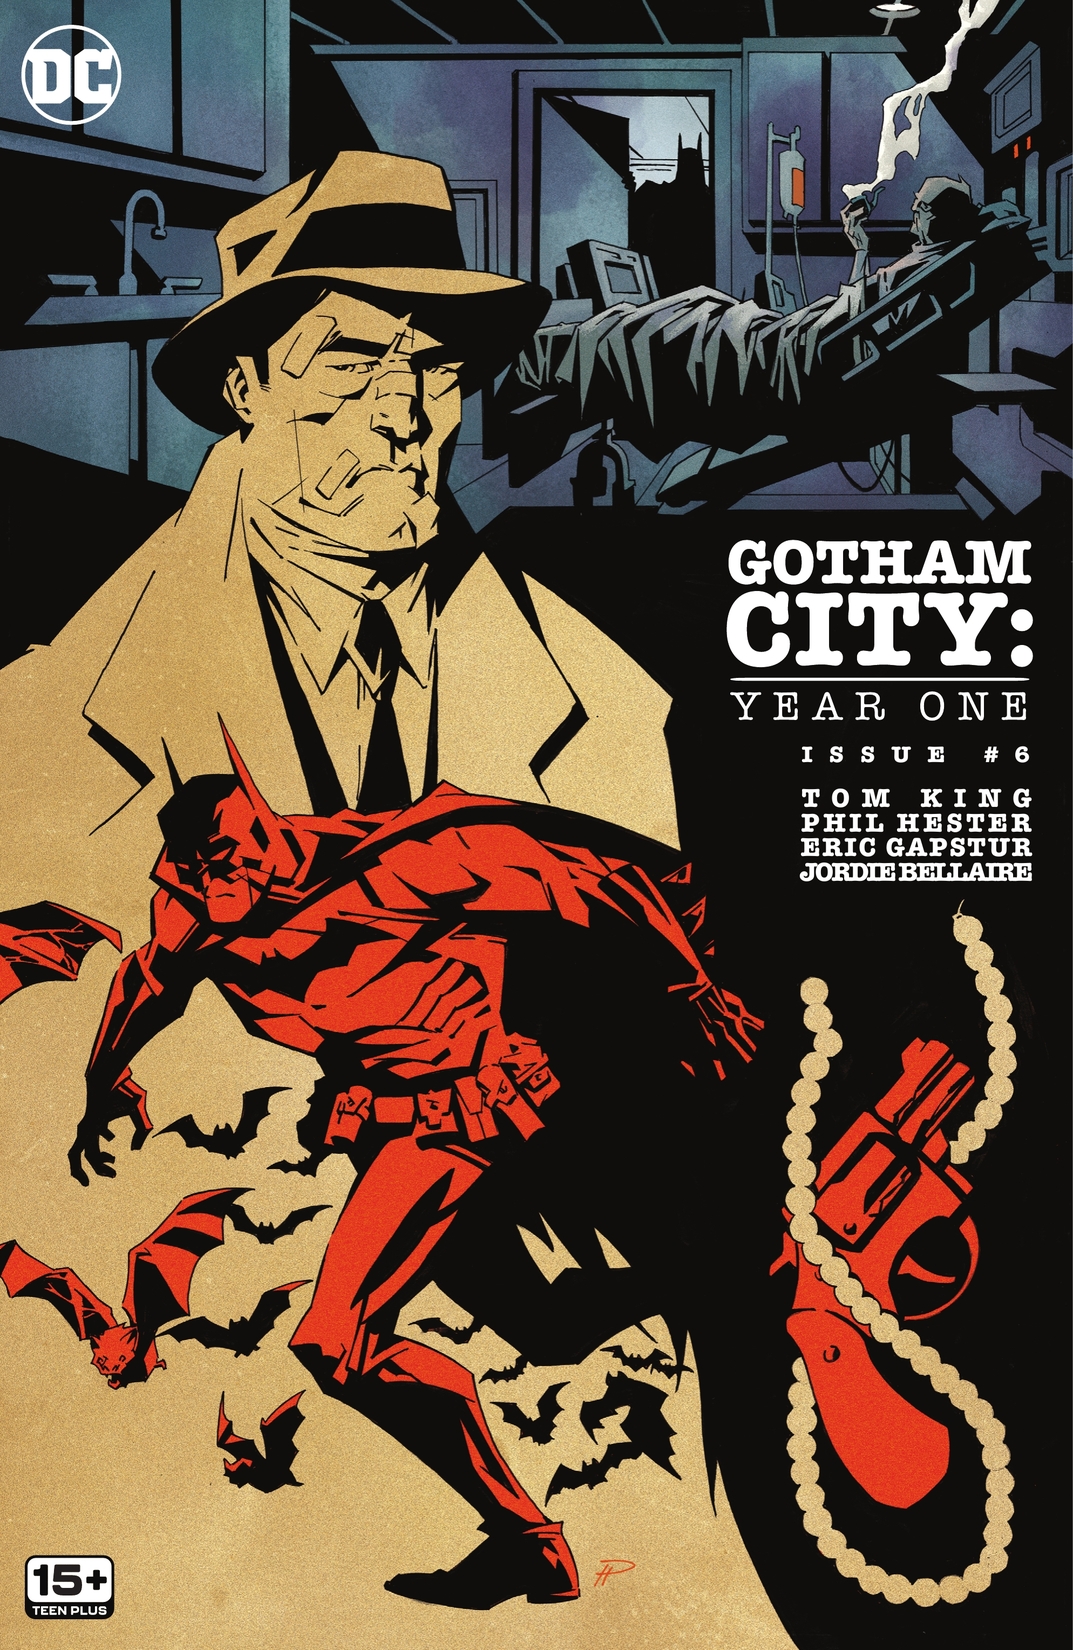 Gotham City: Year One #6 preview images